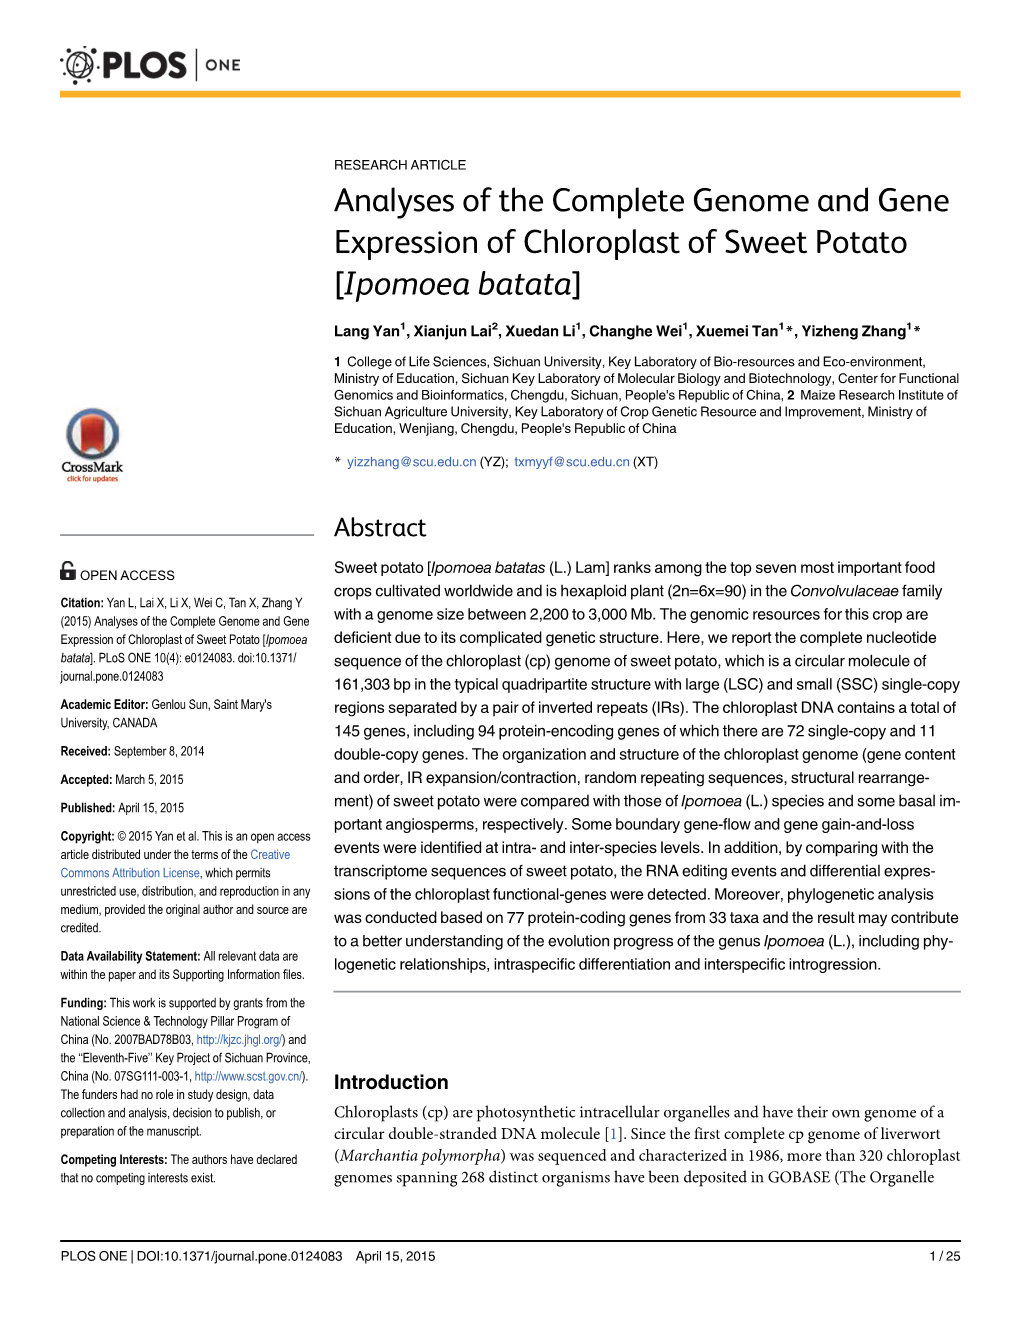 Analyses of the Complete Genome and Gene Expression of Chloroplast of Sweet Potato [Ipomoea Batata]